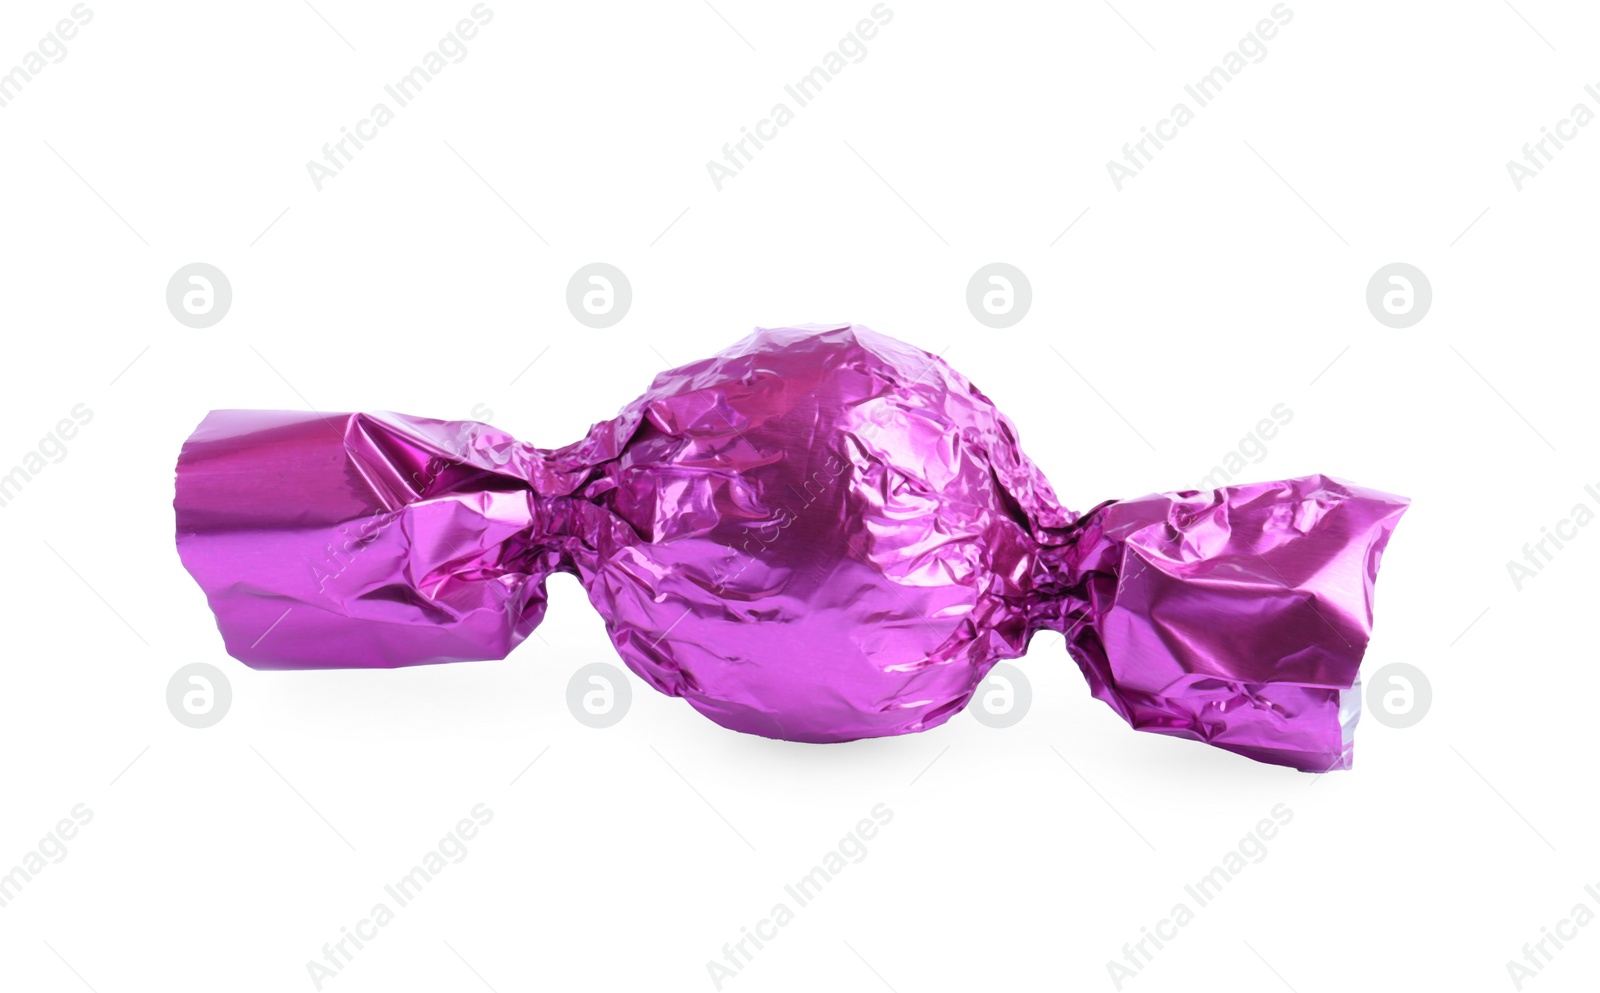 Photo of Tasty candy in violet wrapper isolated on white